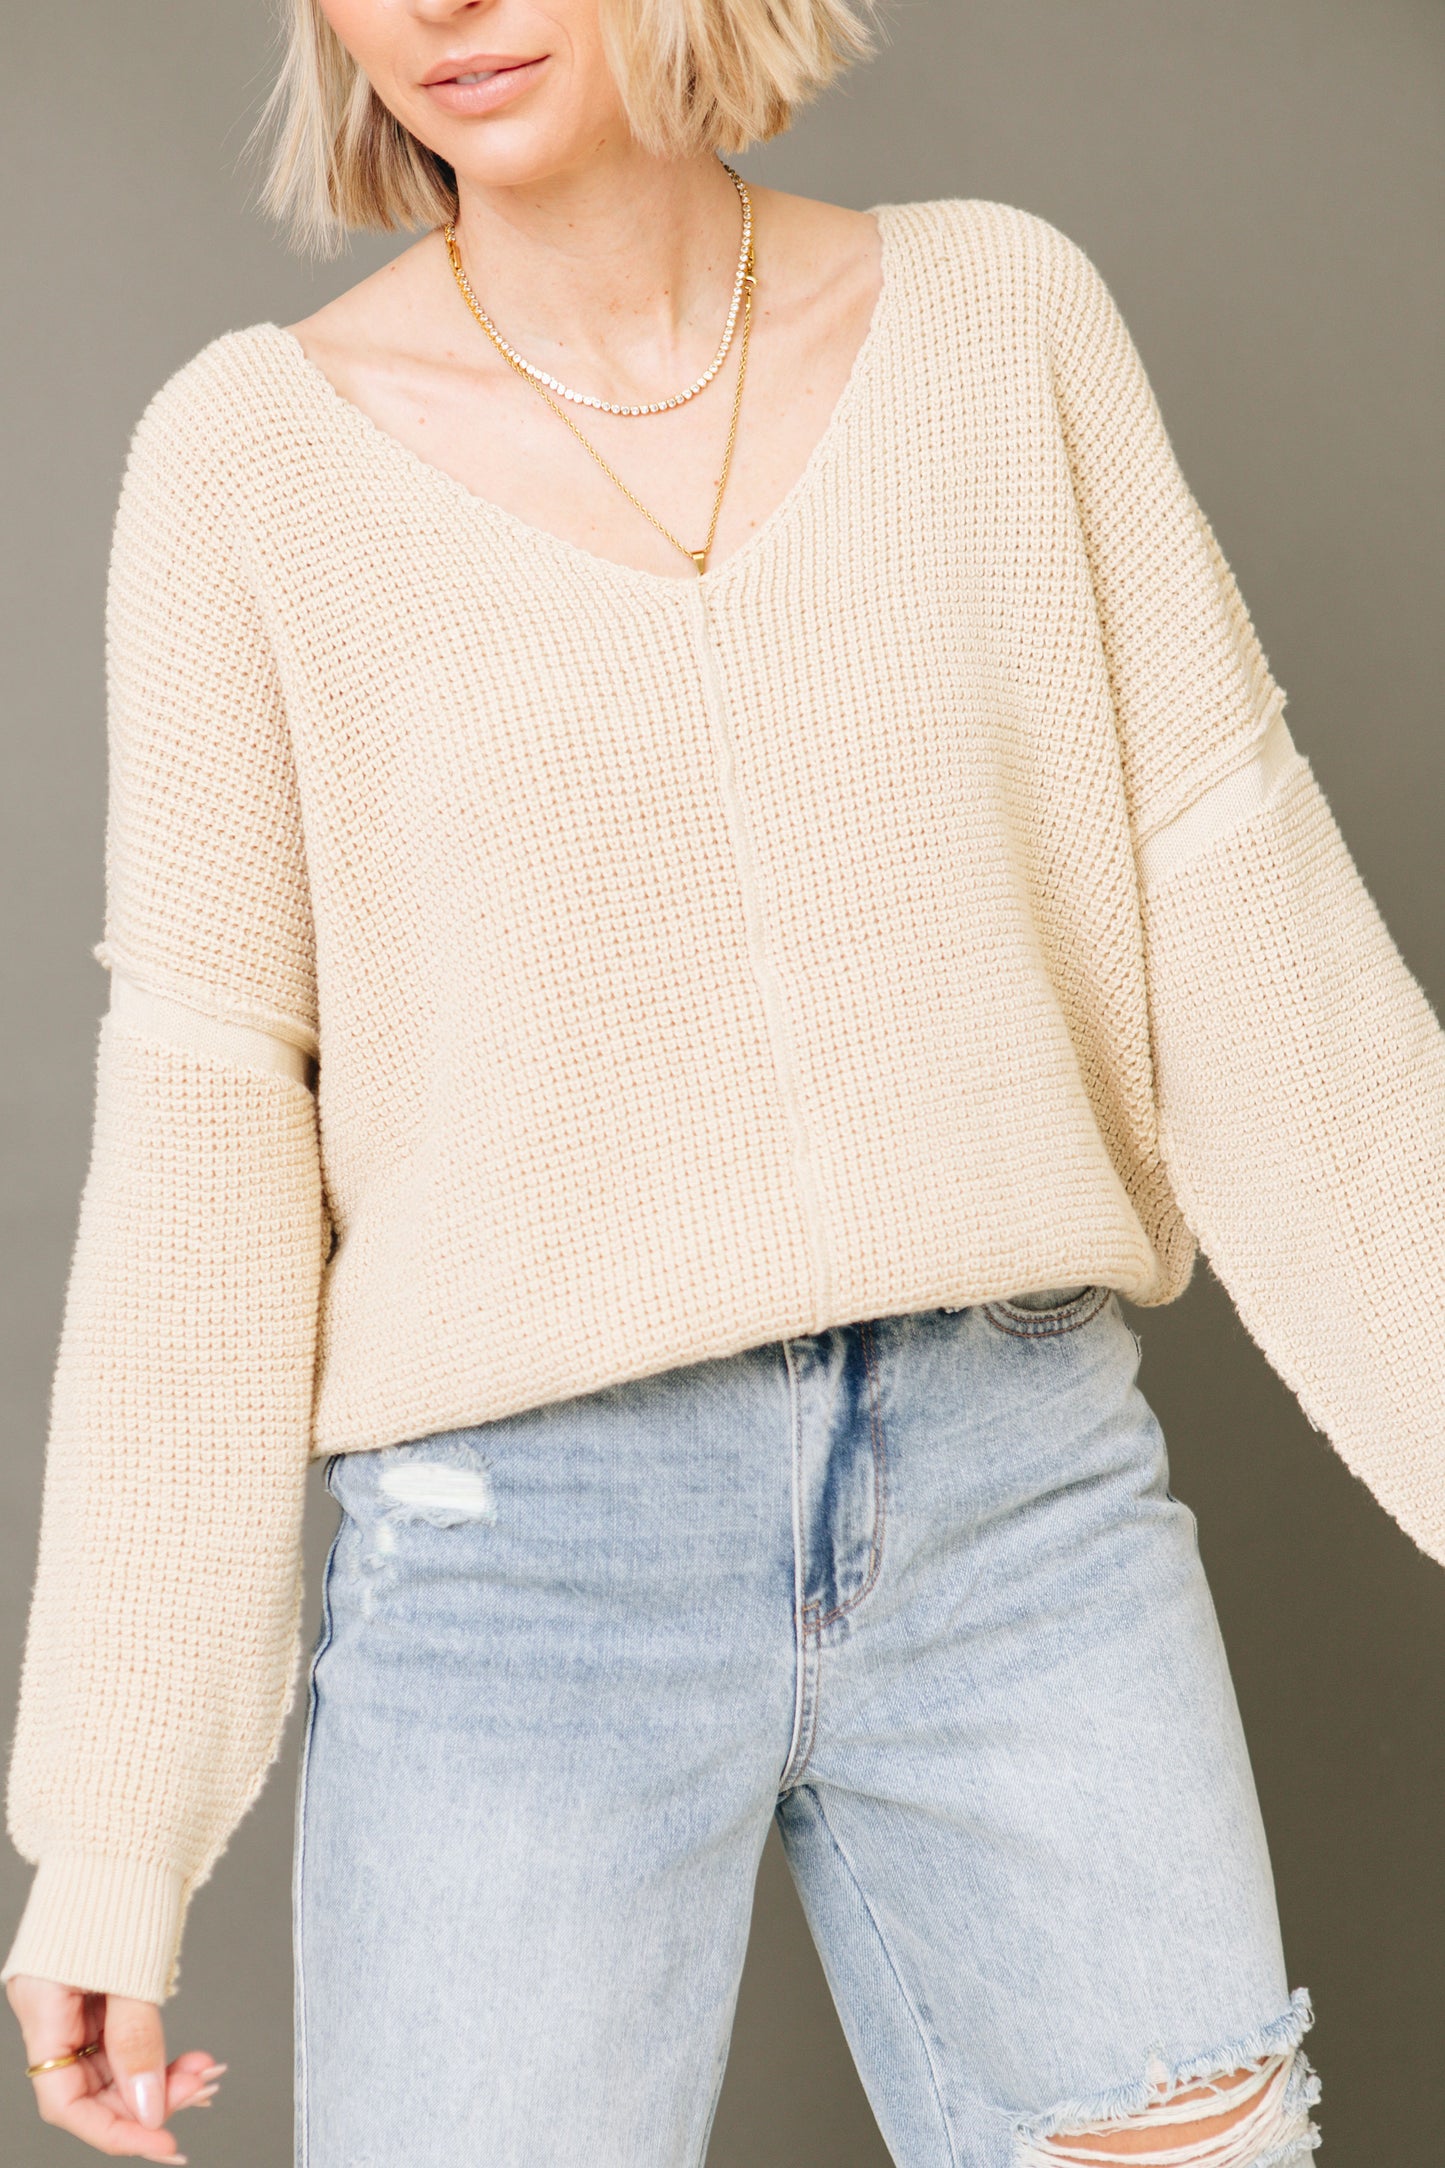 Amber Acclaim V-Neck Textured Sweater (S-3XL)